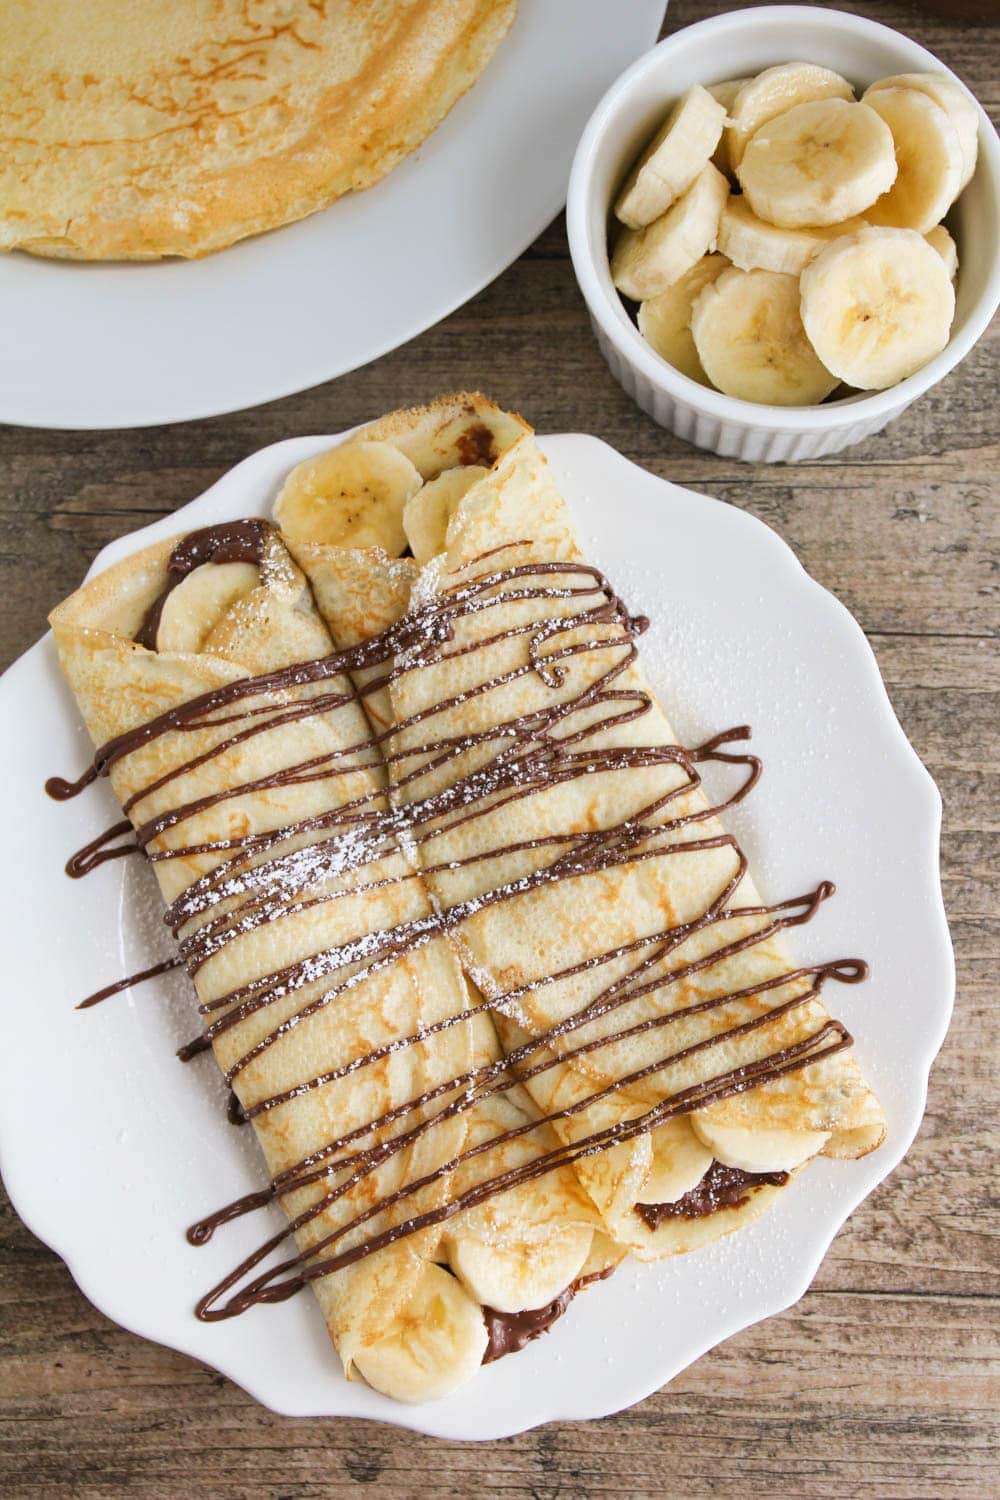 A plate of Banana Nutella crepes